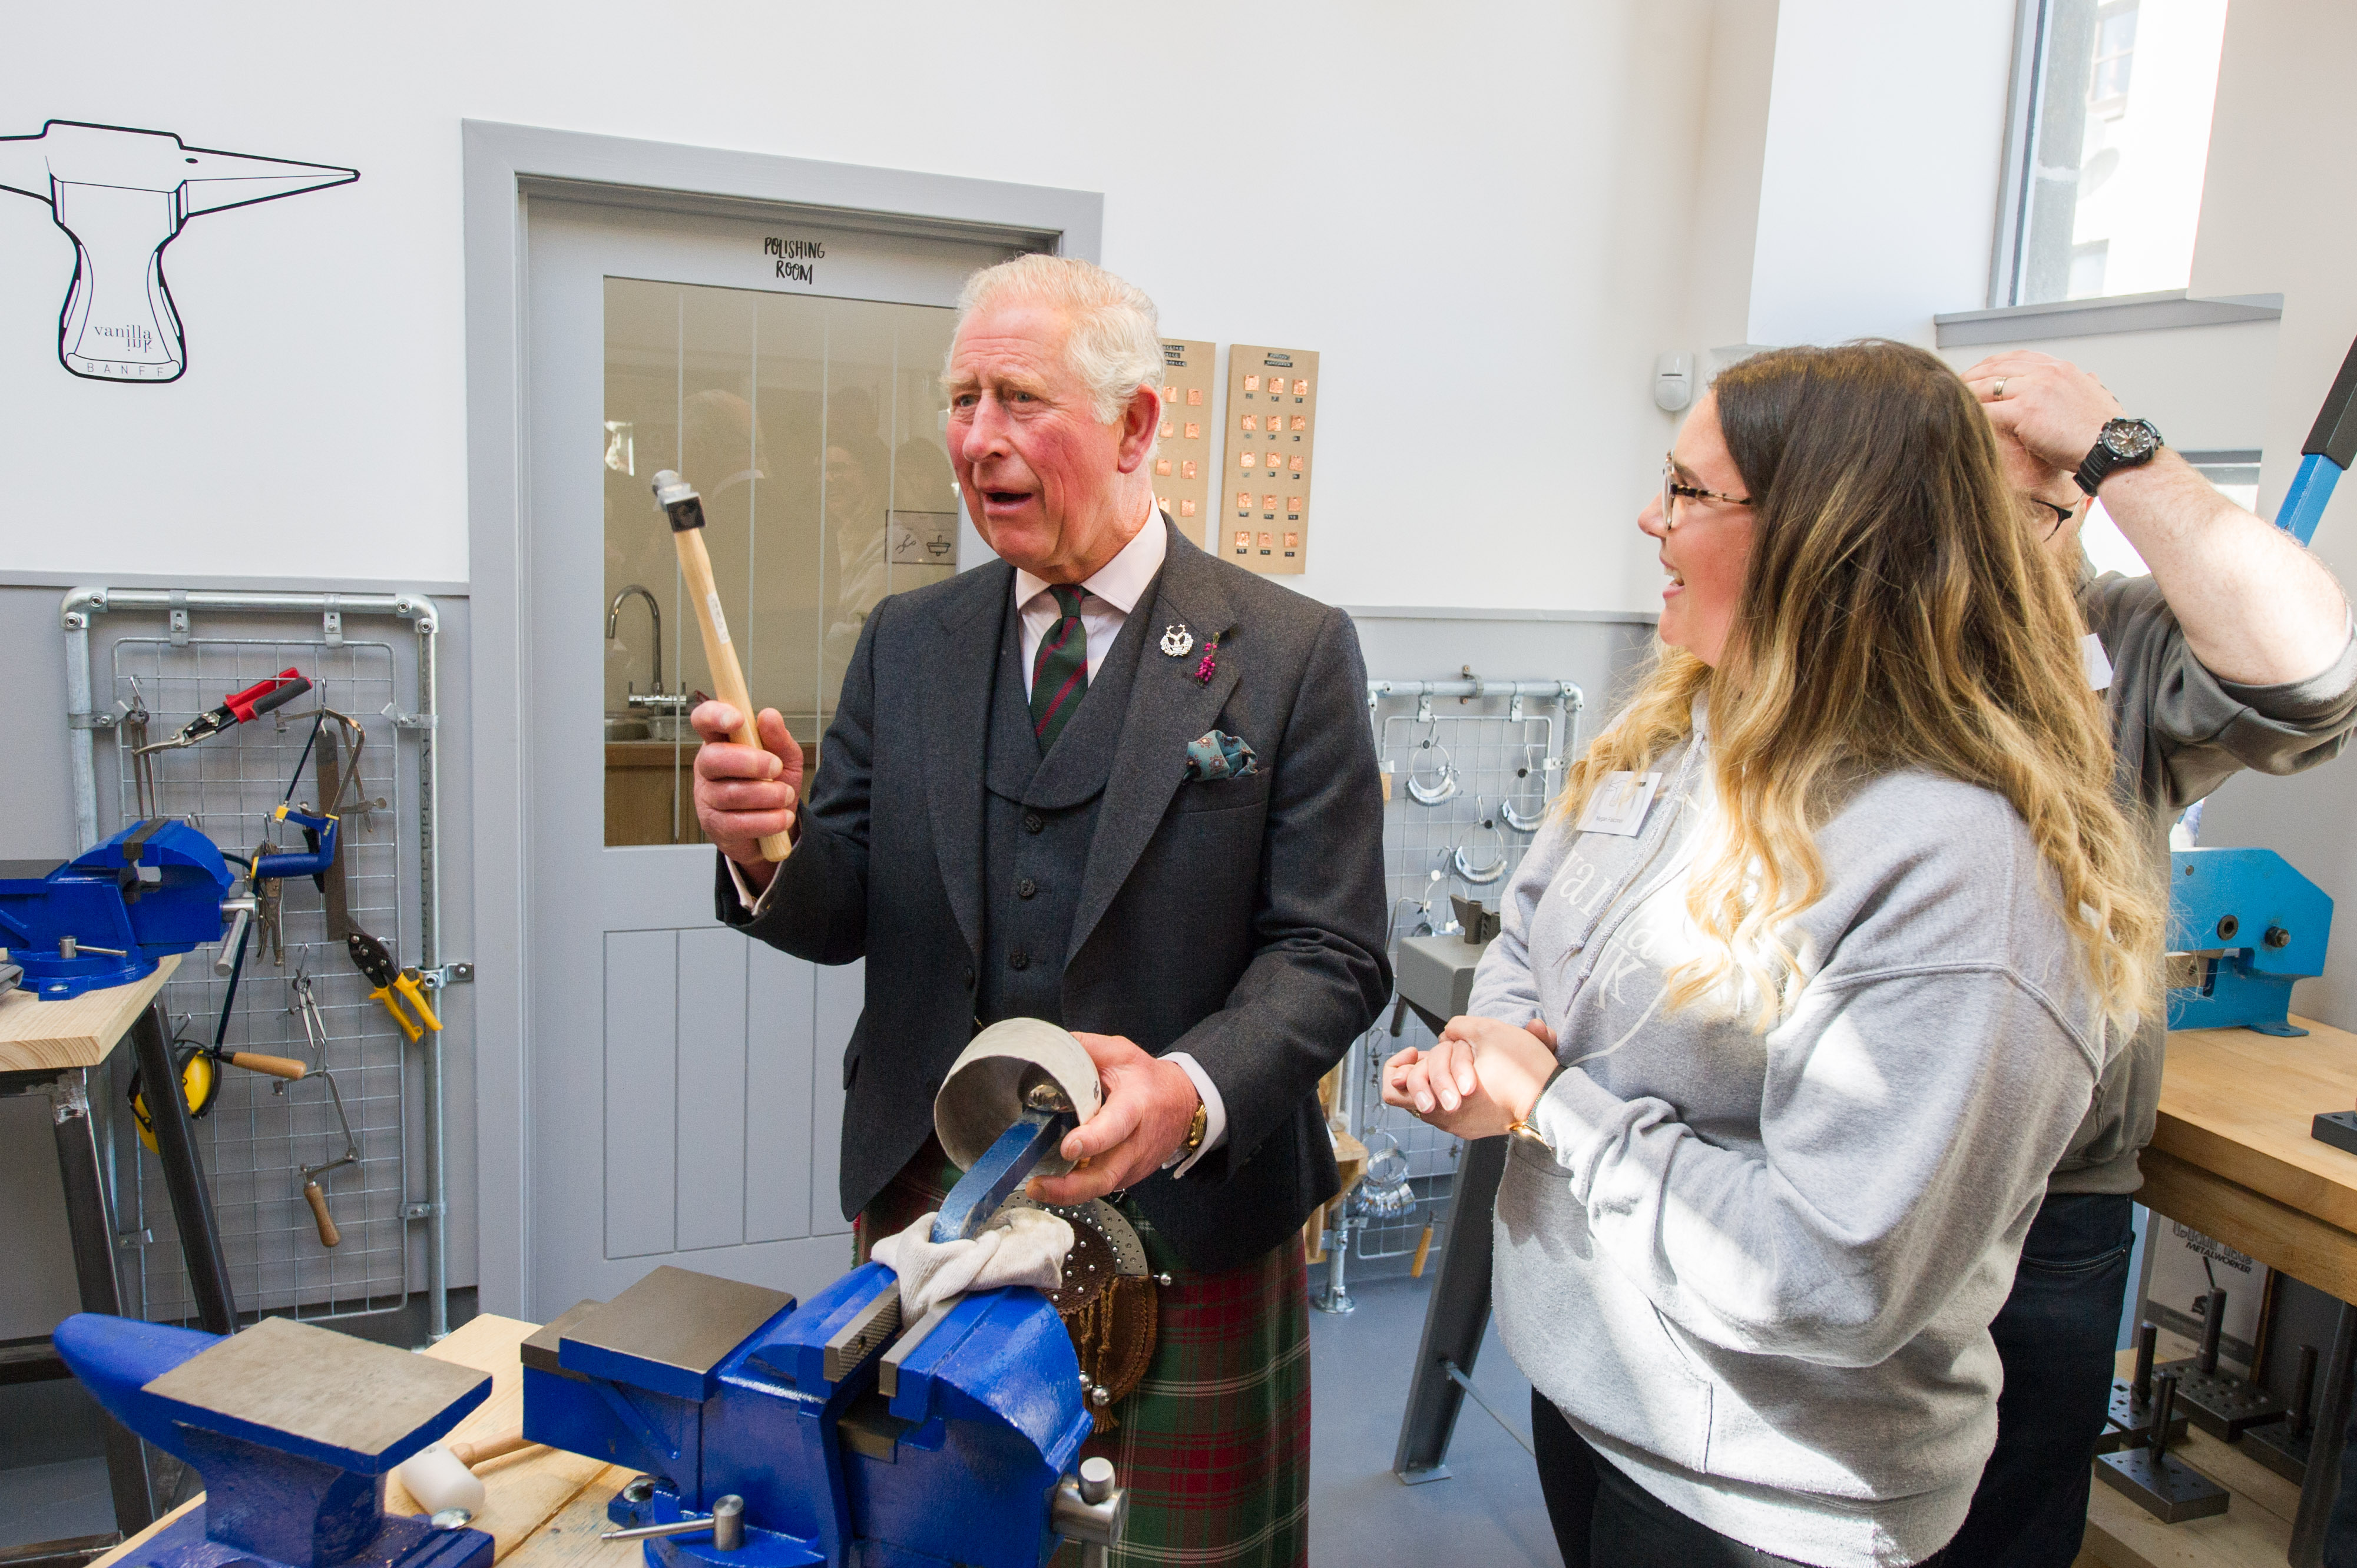 The Duke of Rothesay visits Vanilla Ink, a Social Enterprise business that is bringing Silversmithing and Jewellery Making skills development opportunities to communities in Scotland. Pictures by Jason Hedges and video by Tamsin Gray.